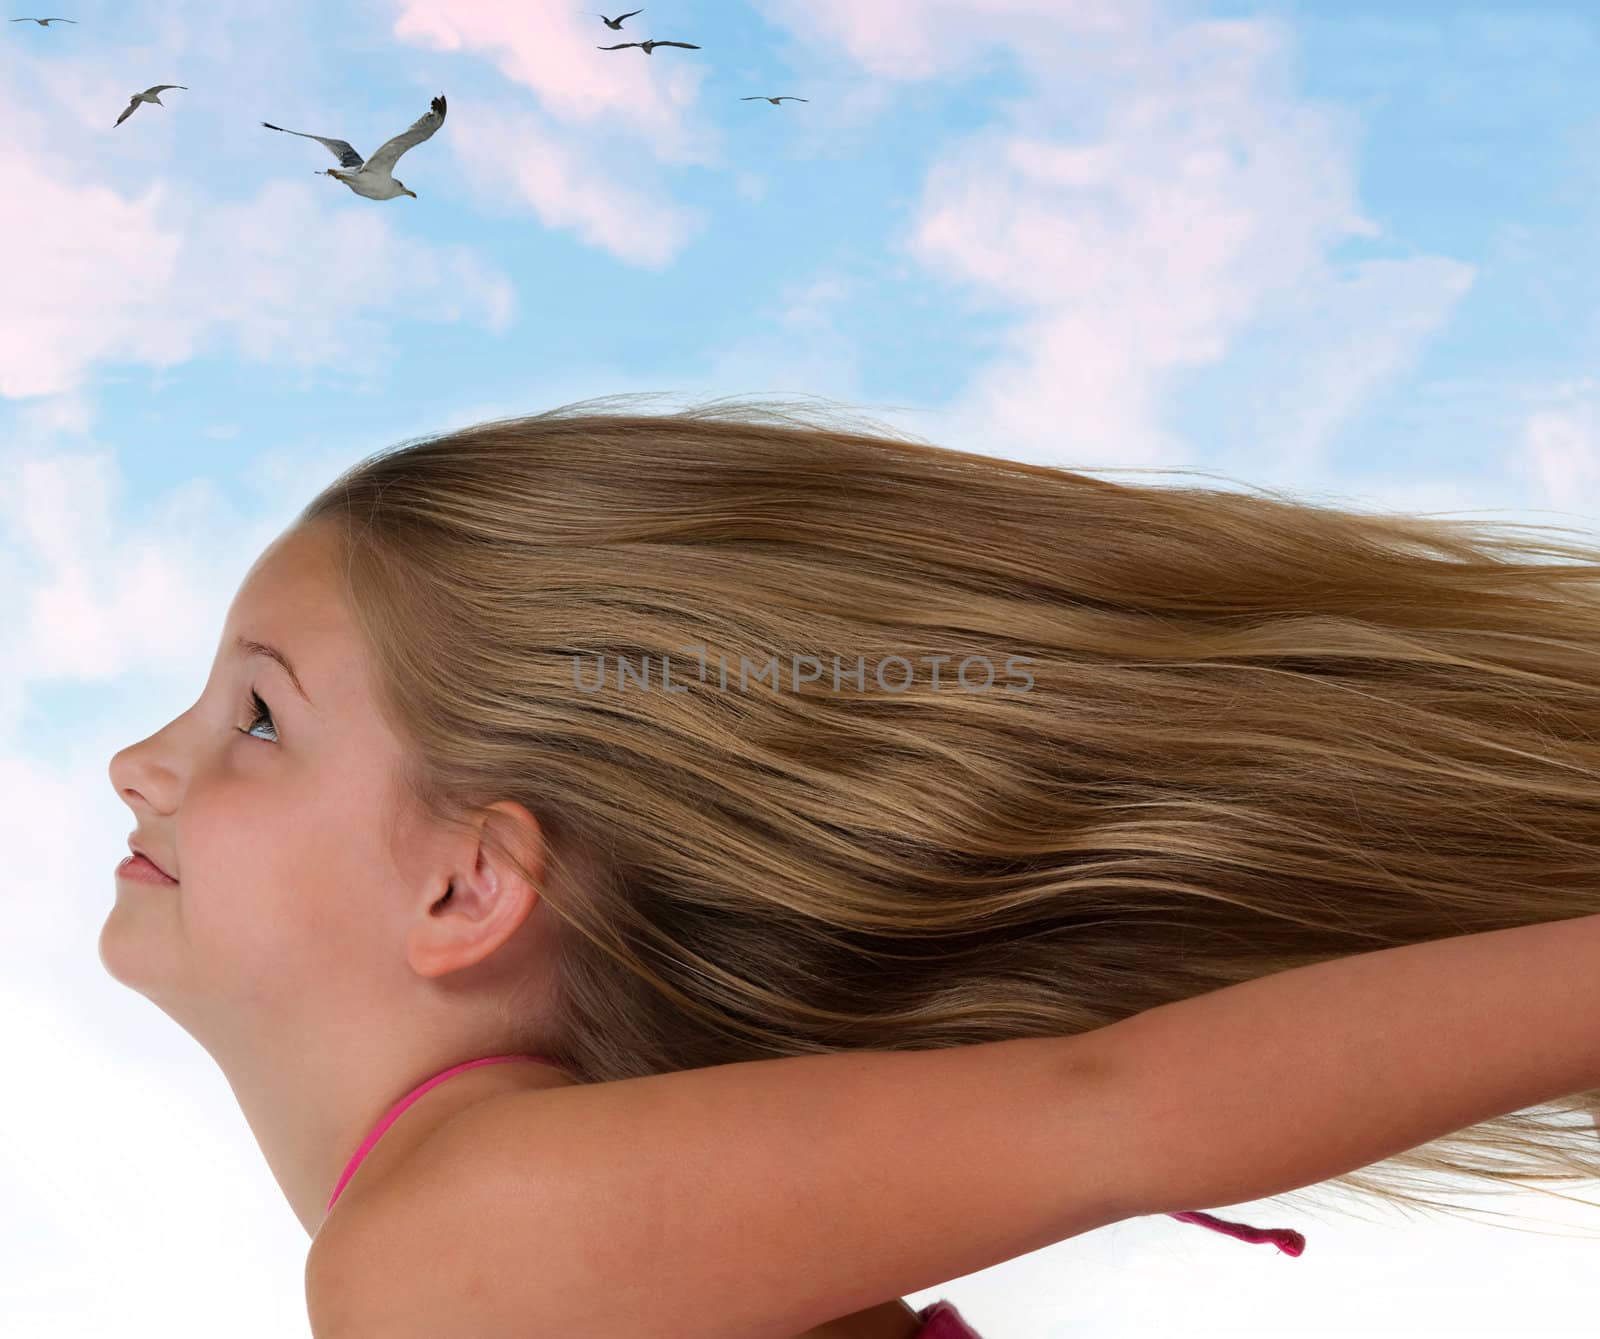 Flying Girl With Beautiful Hair by BVDC